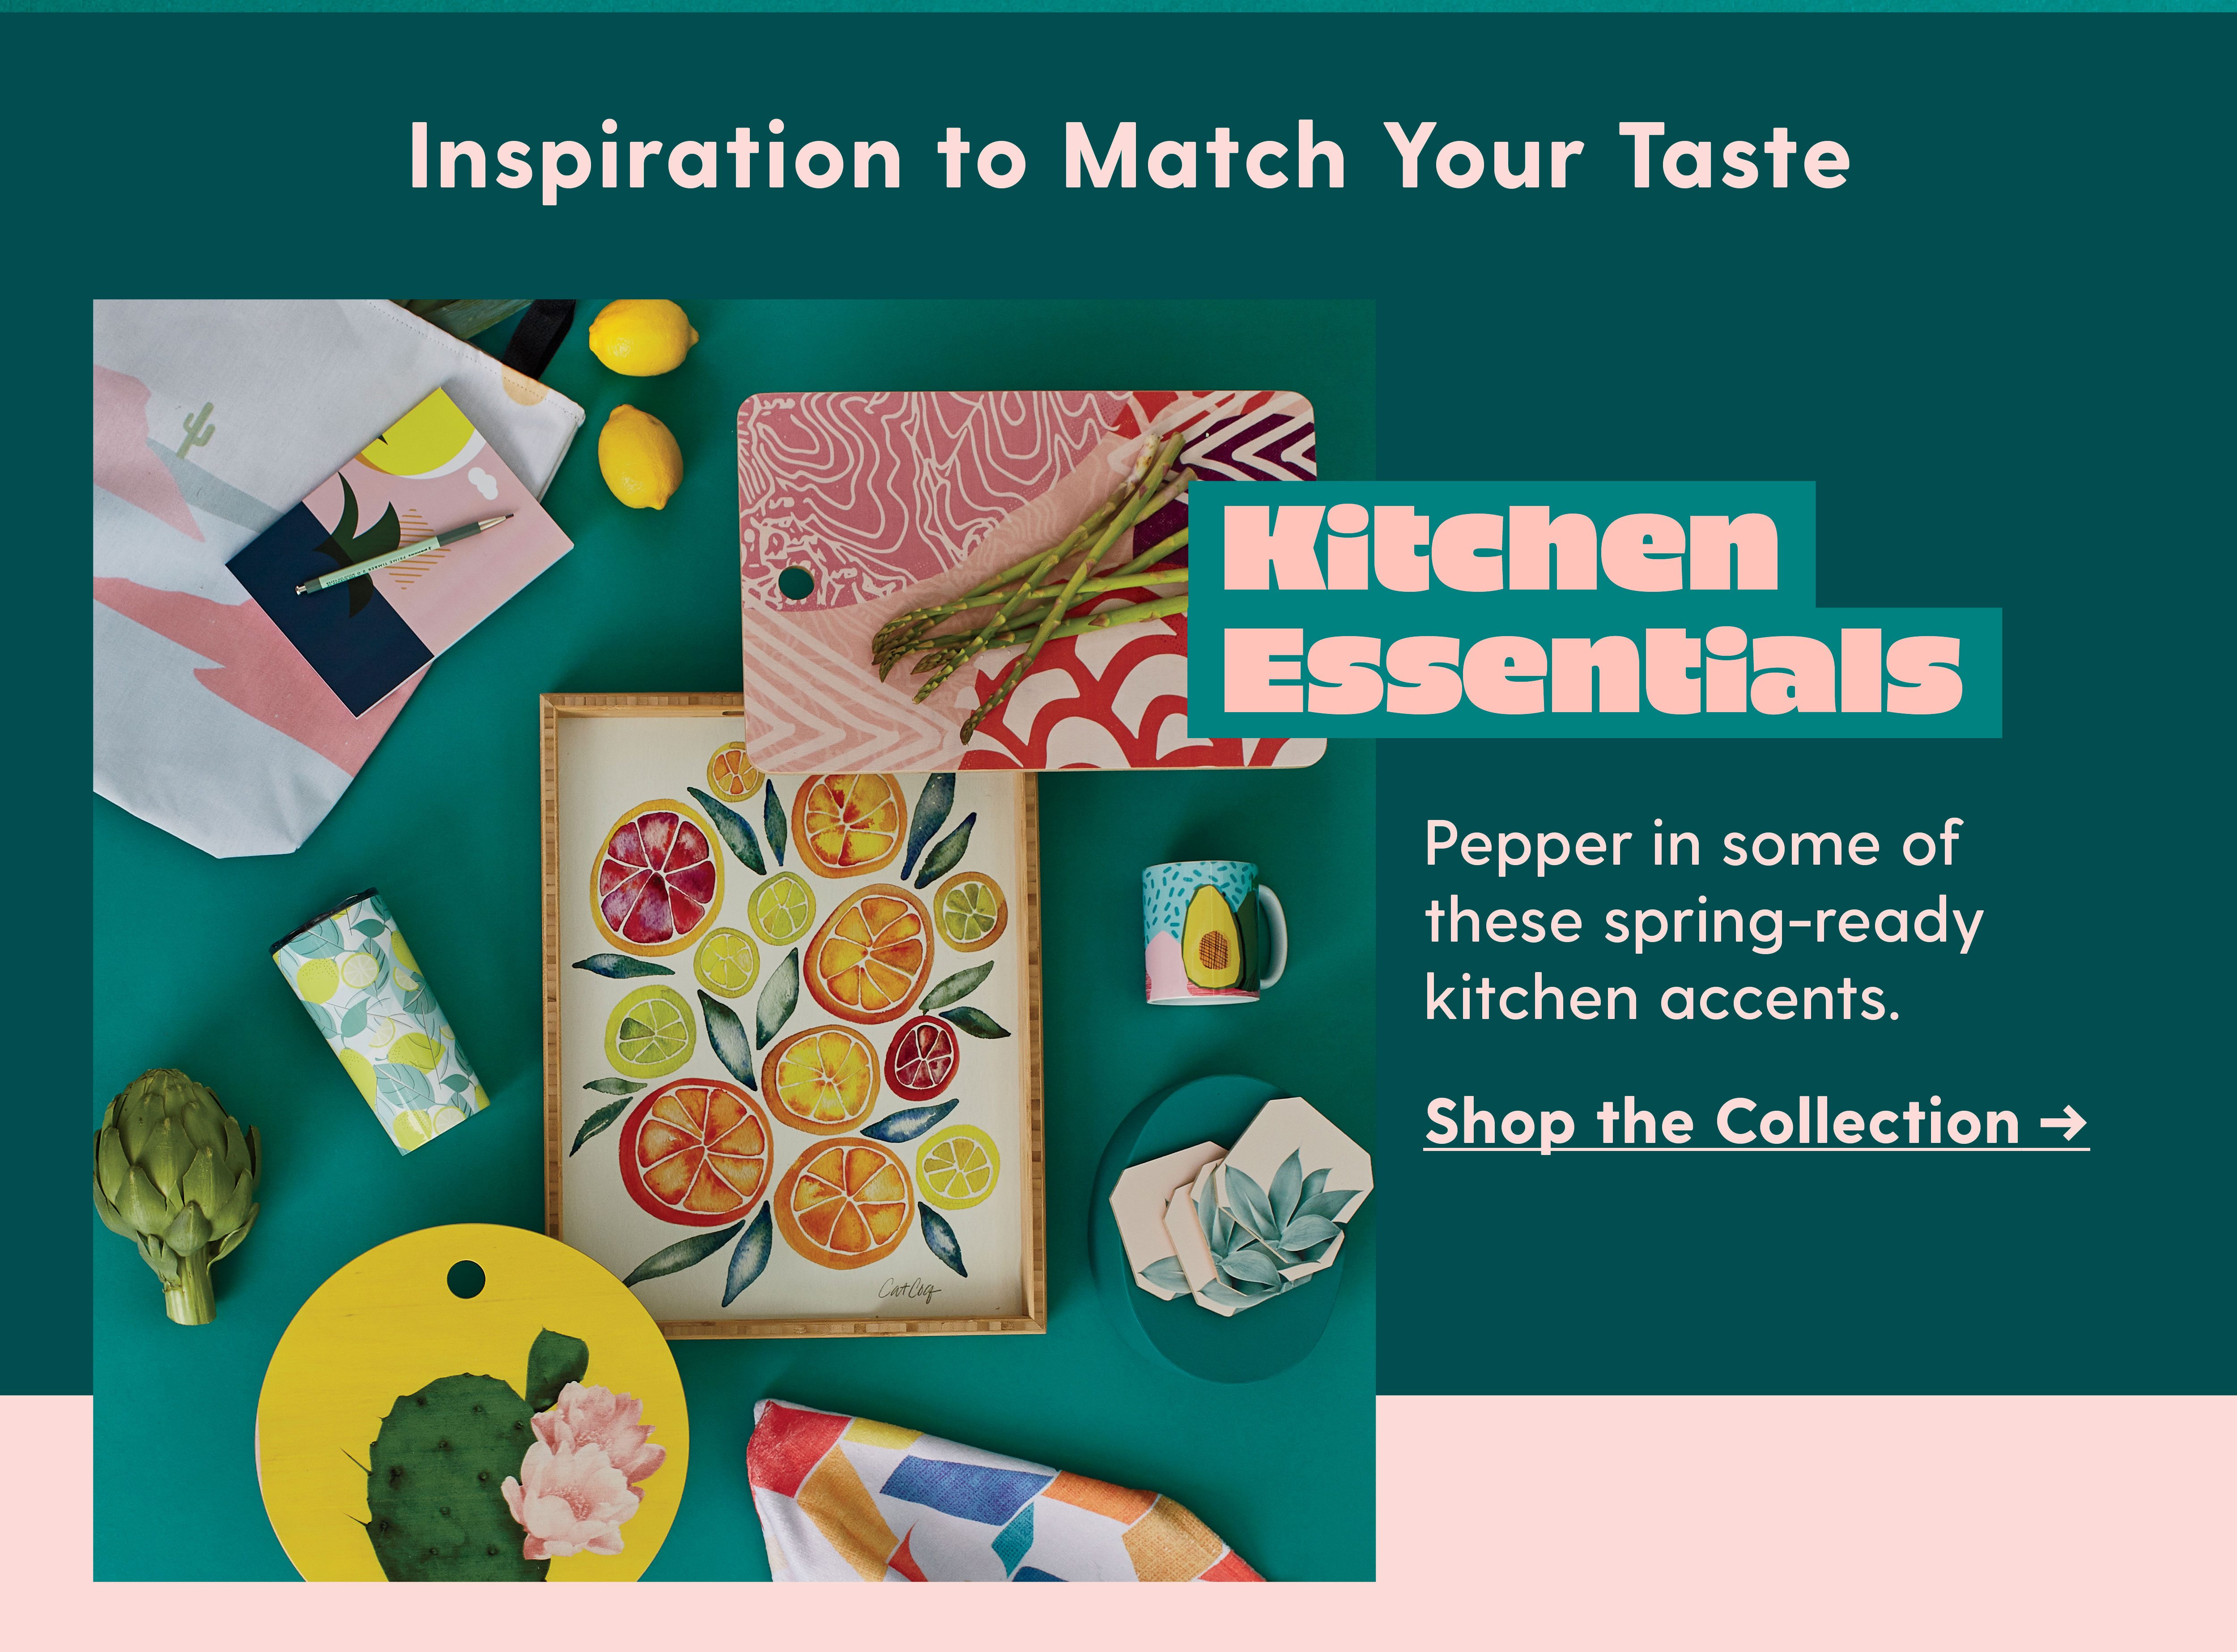 Kitchen Essentials Pepper in some of these spring-roady kitchen accents. Shop the Collection